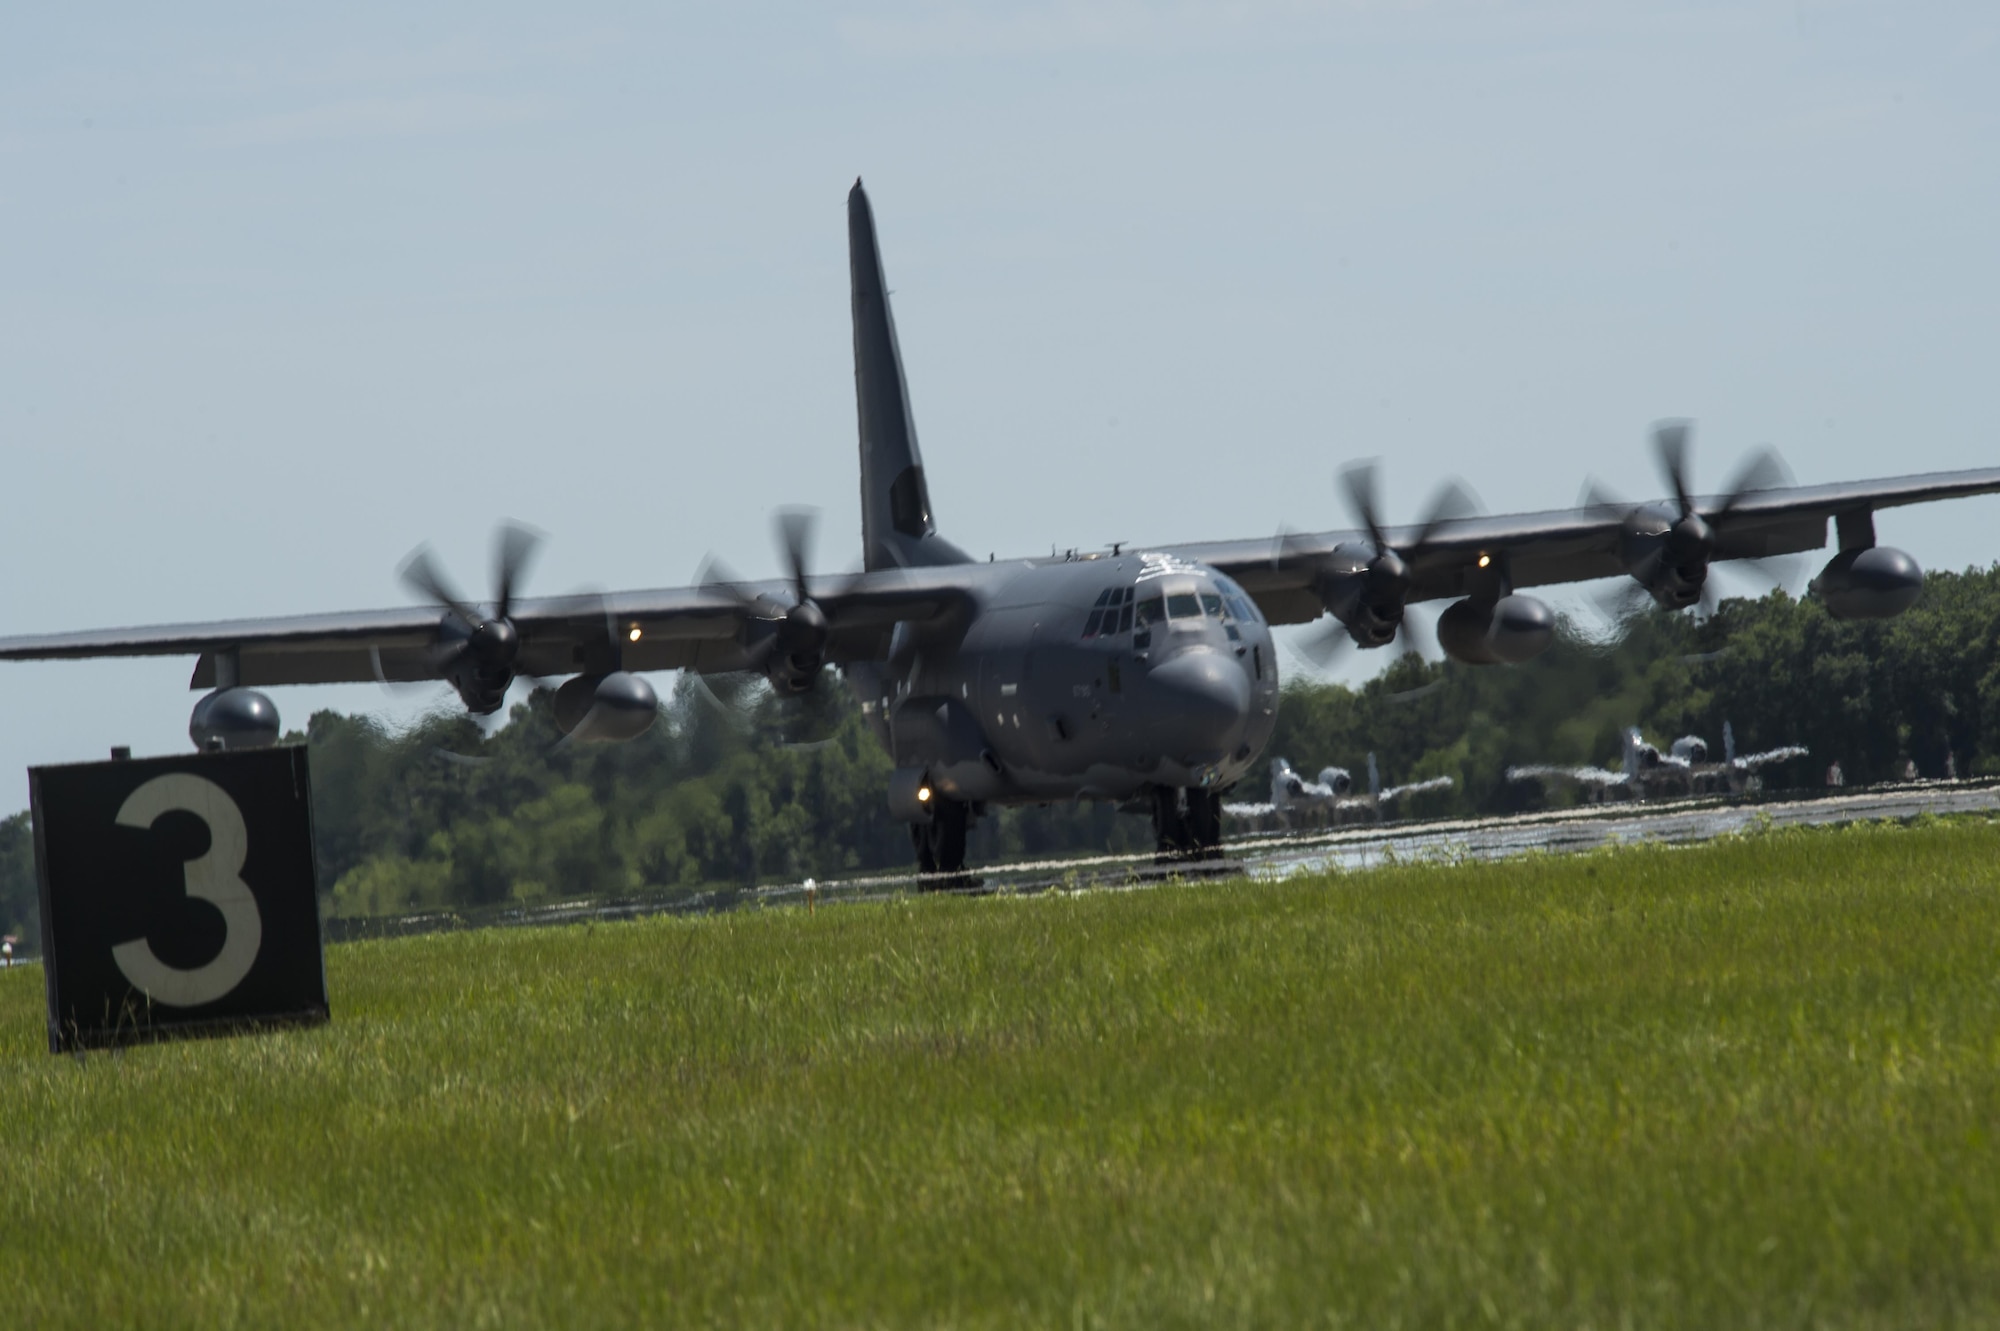 An HC-130J Combat King II arrives June 9, 2016, at Moody Air Force Base, Ga, The landing marked the joining of the ninth and final HC-130J to the 71st Rescue Squadron’s fleet. (U.S. Air Force photo by Senior Airman Ceaira Tinsley/Released)